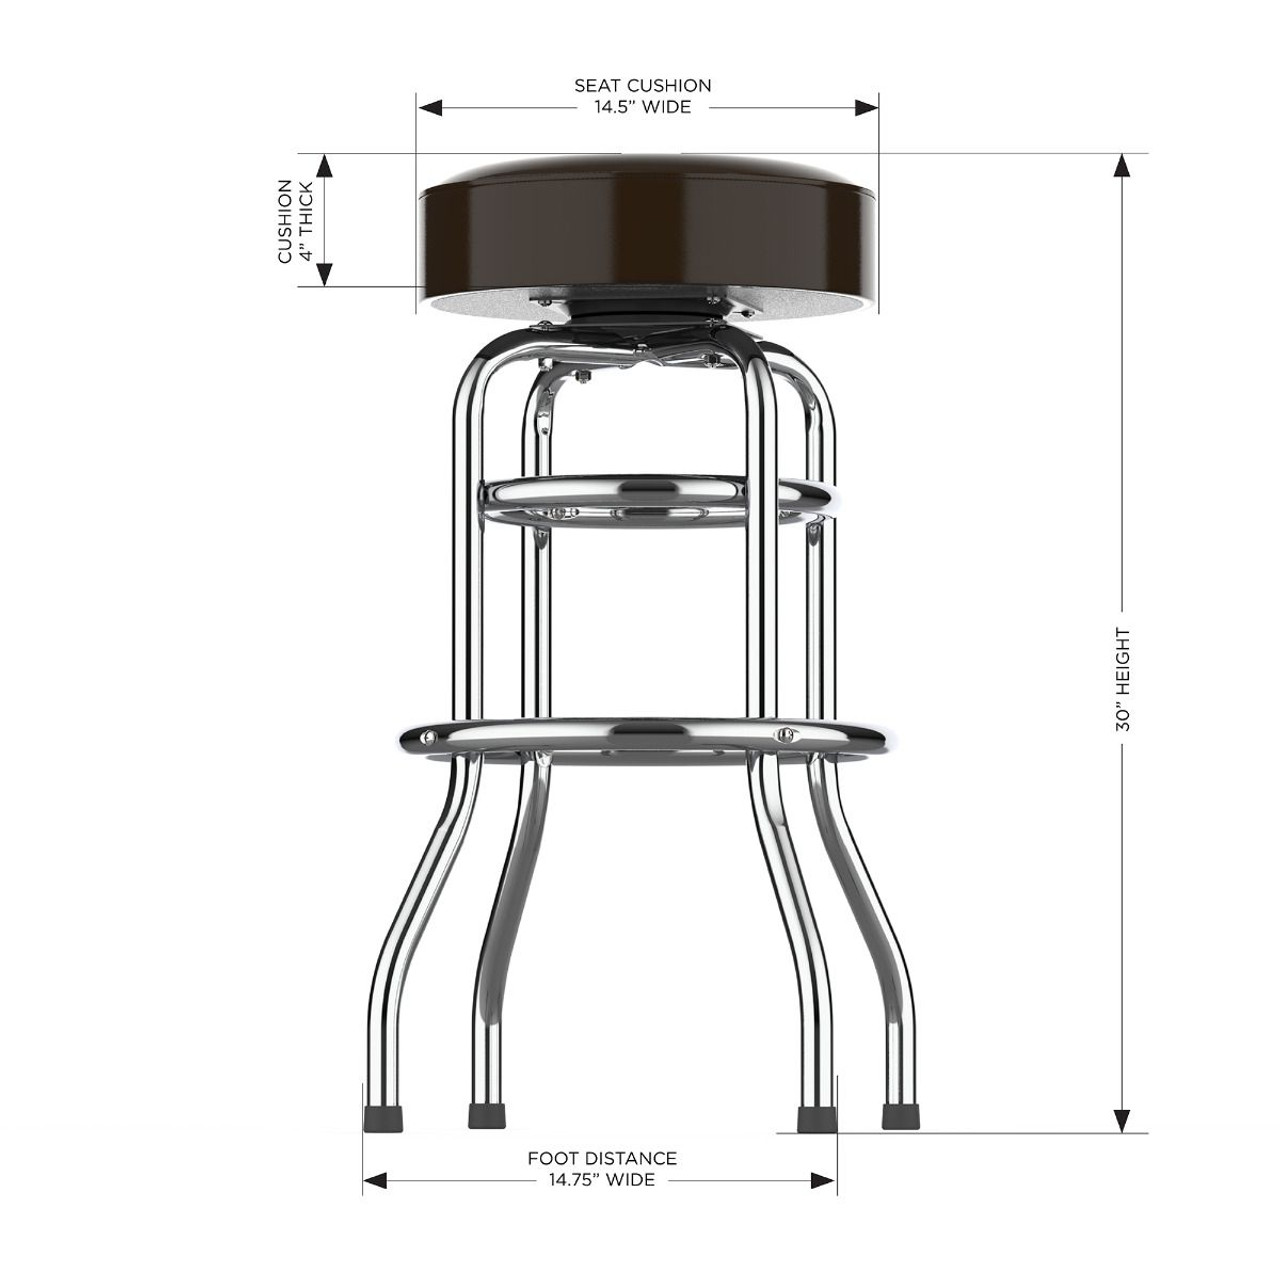 Cle, Cleveland, Browns, 30", Chrome, Bar, Stool, 680-1020, 26-1001, NFL, Imperial, 720801324098